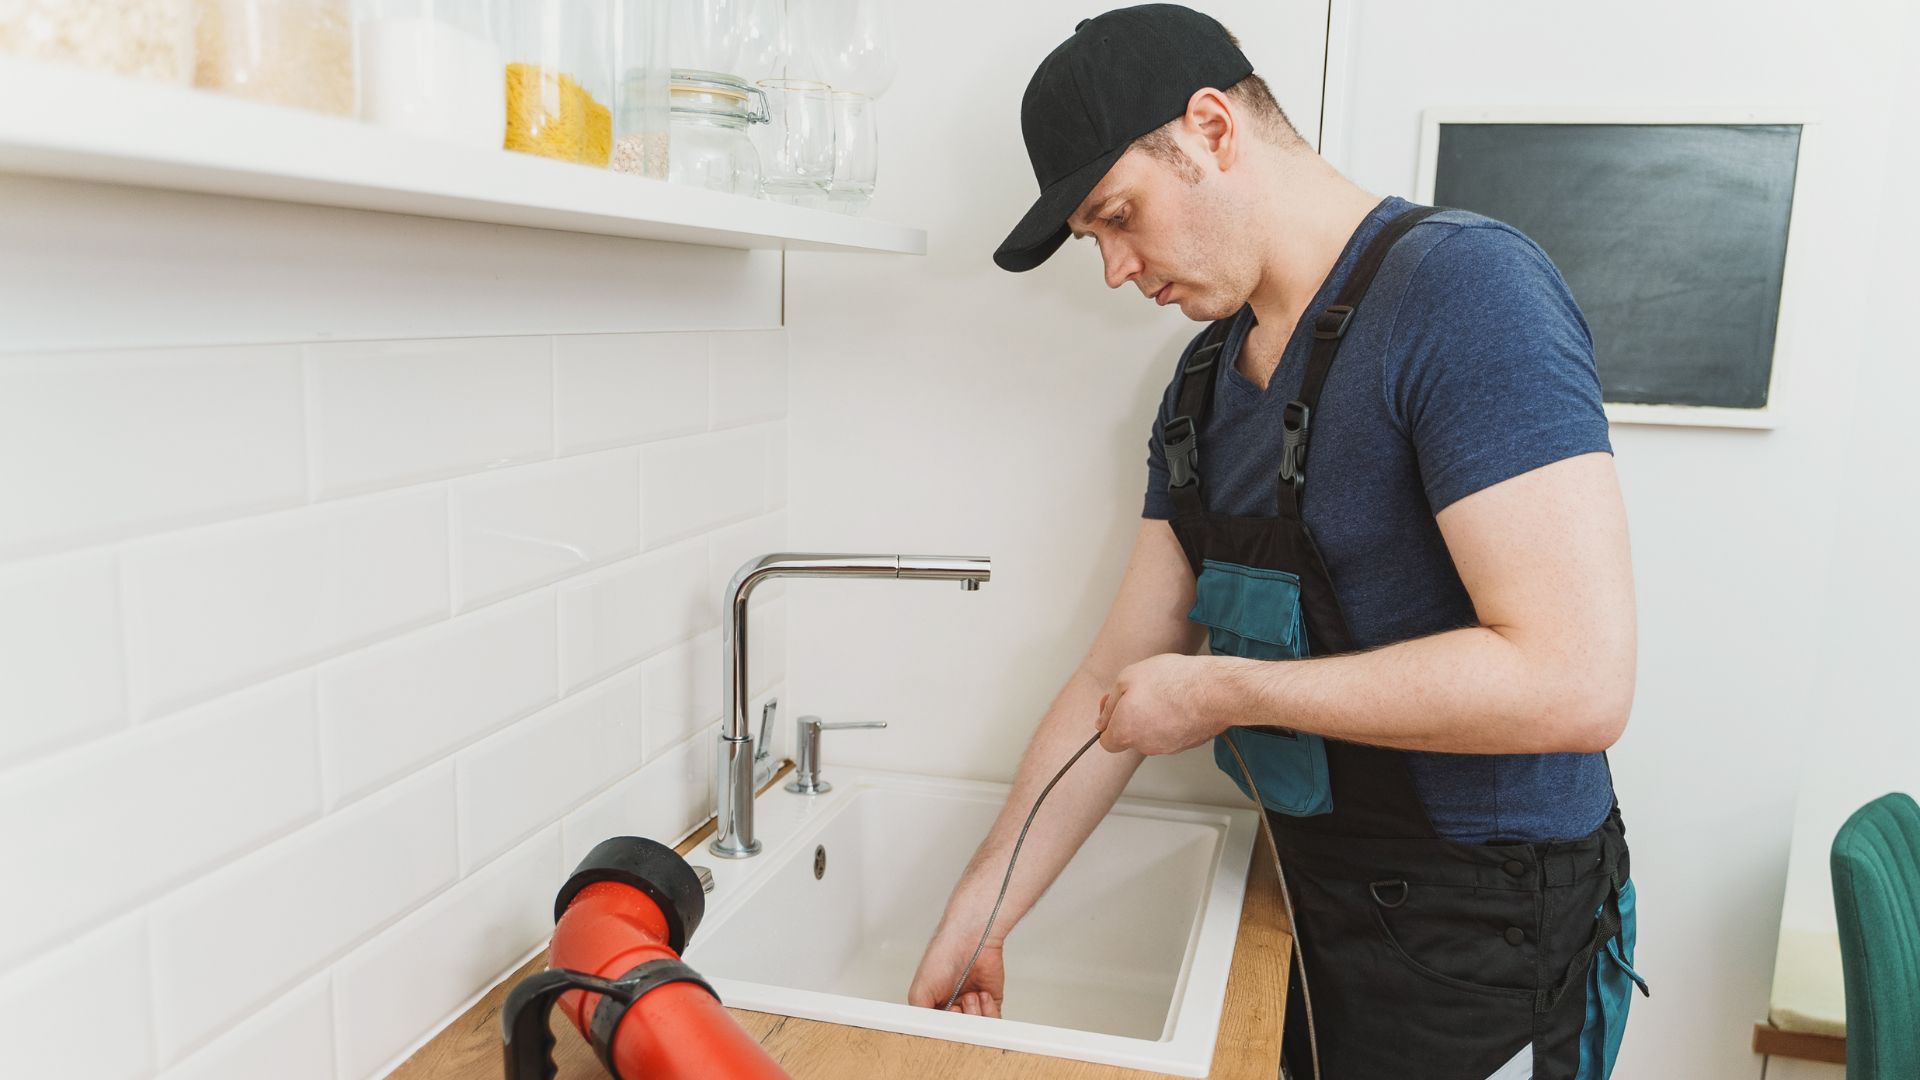 Benefits of drain cleaning with Cornels Plumbing include prevention of costly sewer replacements.